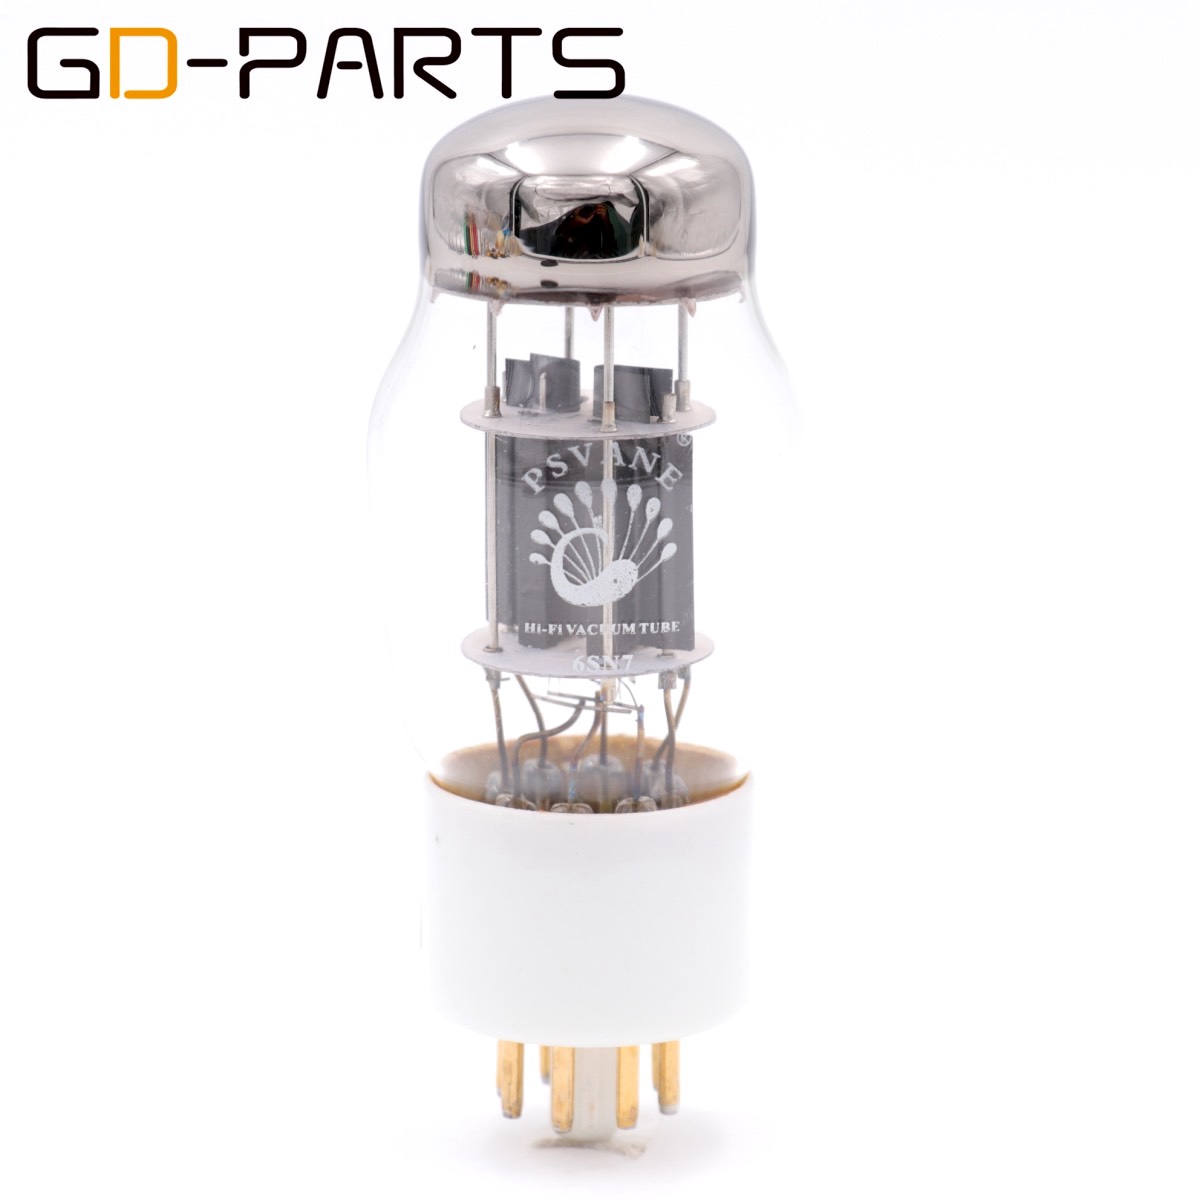 GD-PARTS New Matched Pair PSVANE 6SN7 Vacuum Tube Replace CV181 6N8P For Vintage Hifi Audio Amplifier DIY 